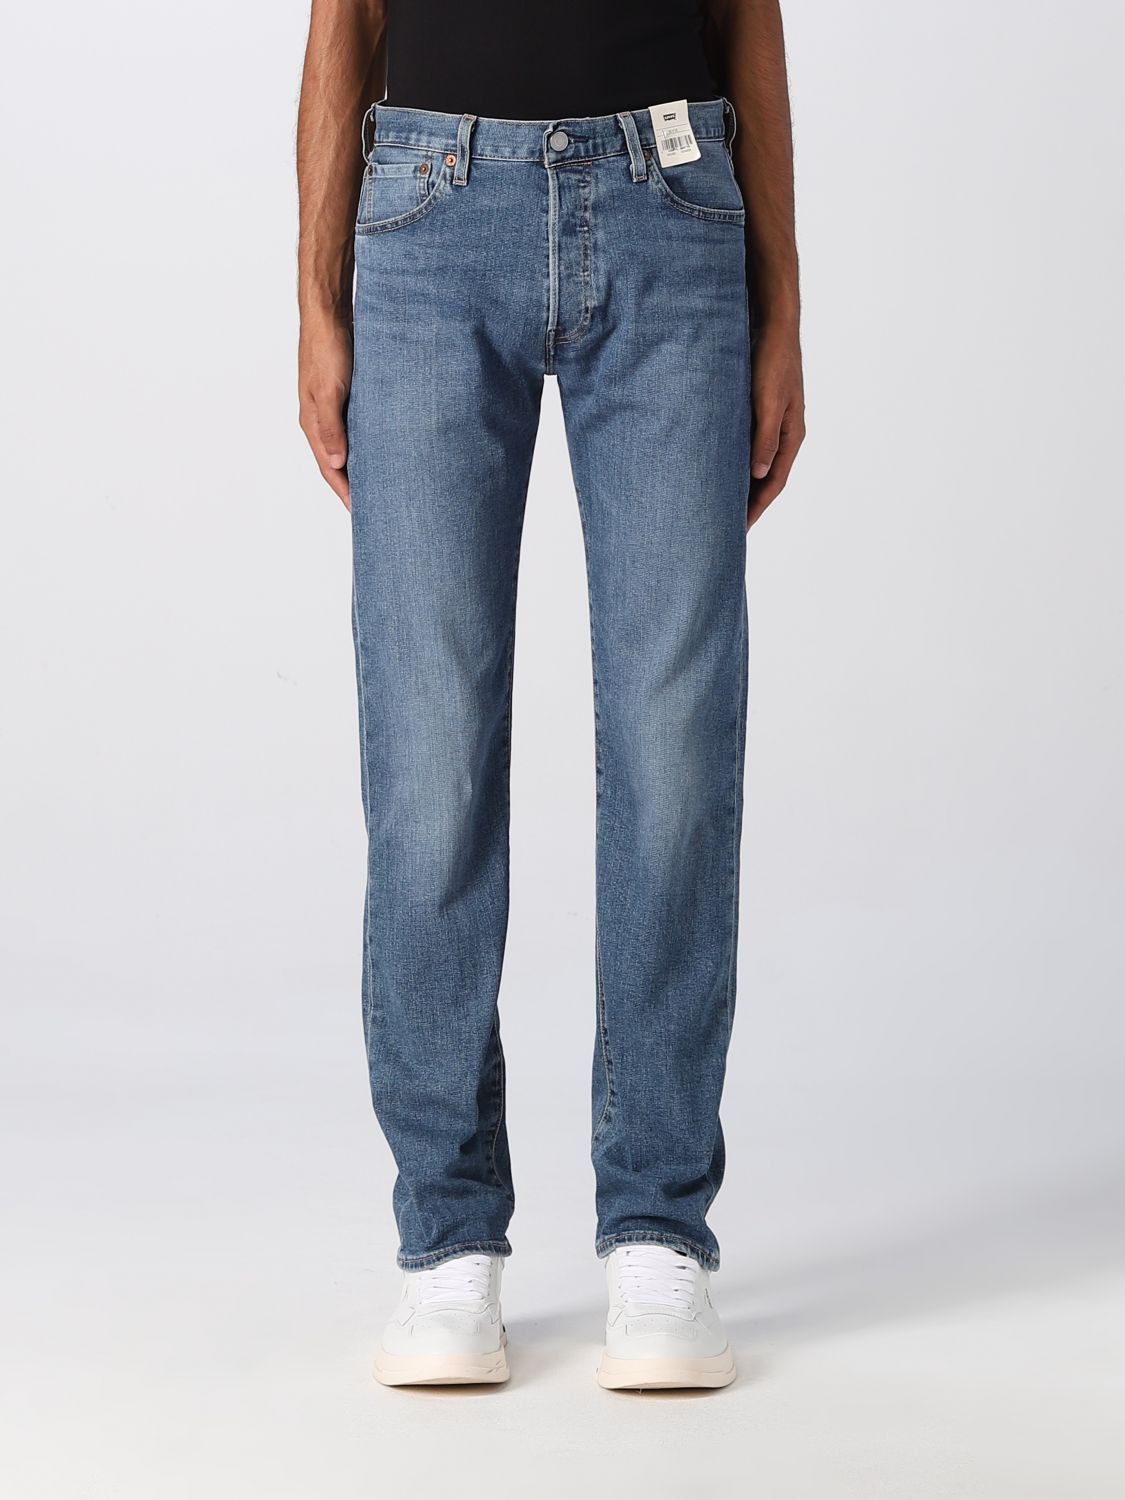 LEVI'S: jeans for man - Denim | Levi's jeans 005013220 online on GIGLIO.COM